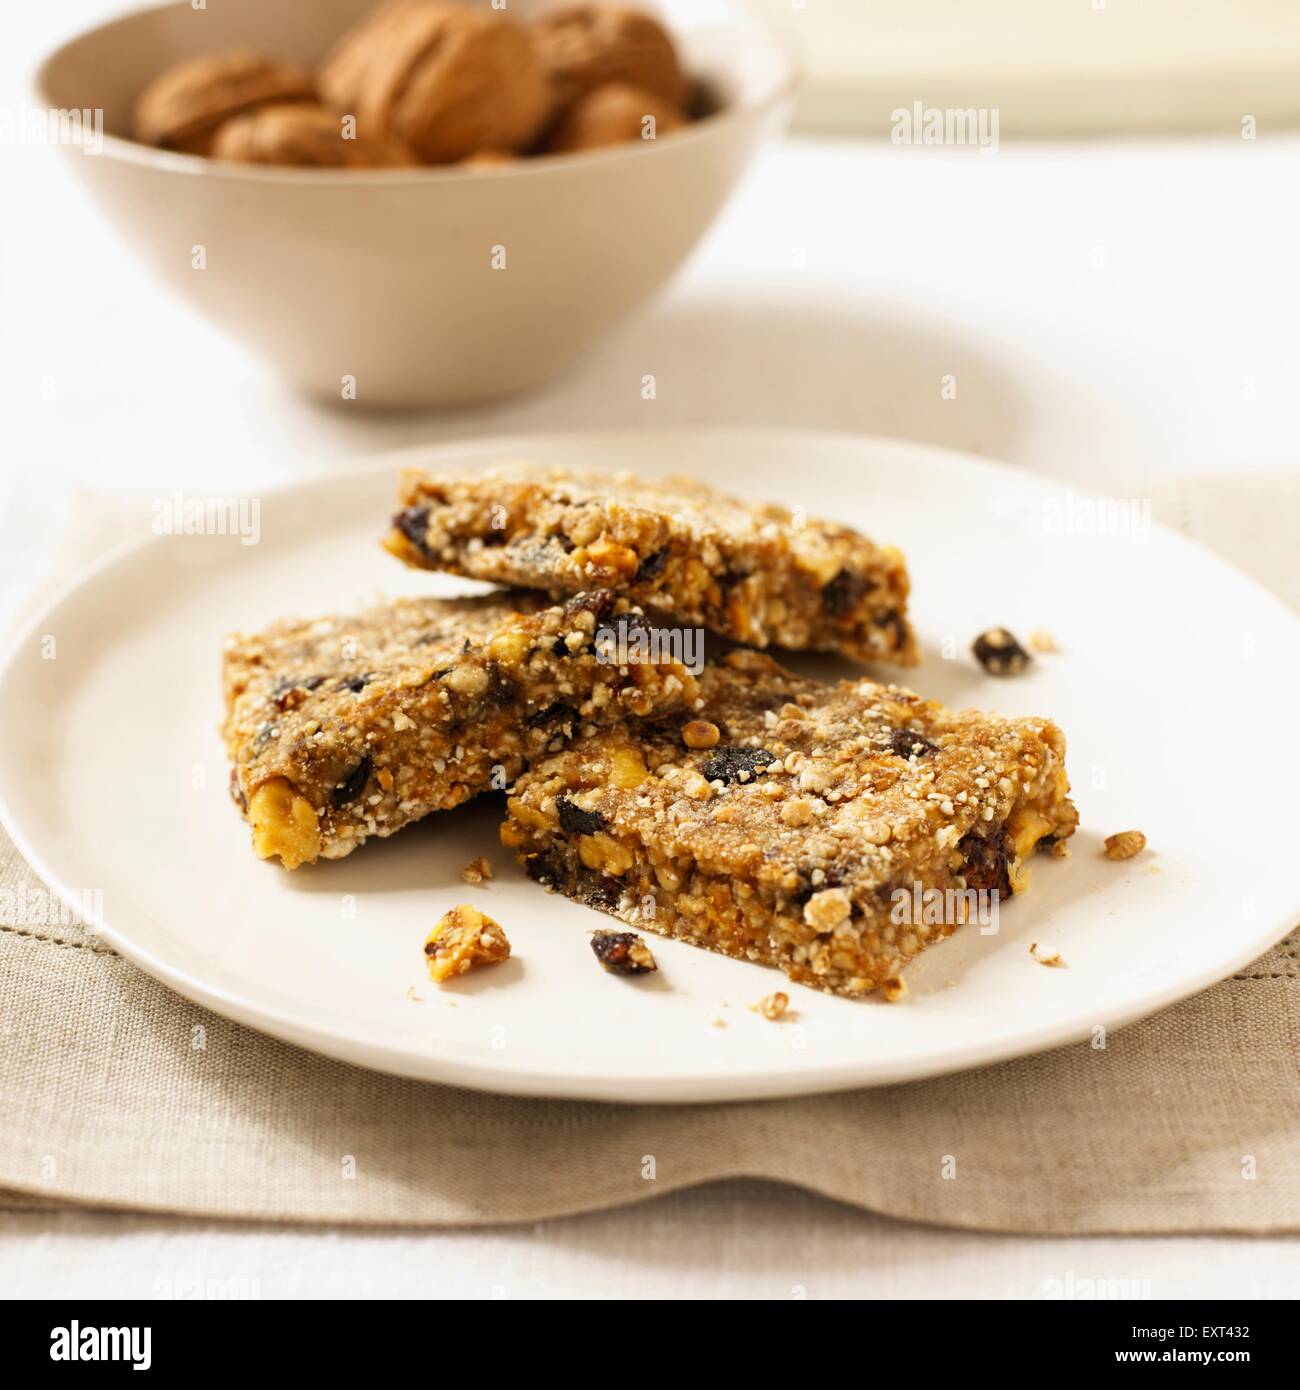 Currant and walnut muesli bars on a plate Stock Photo